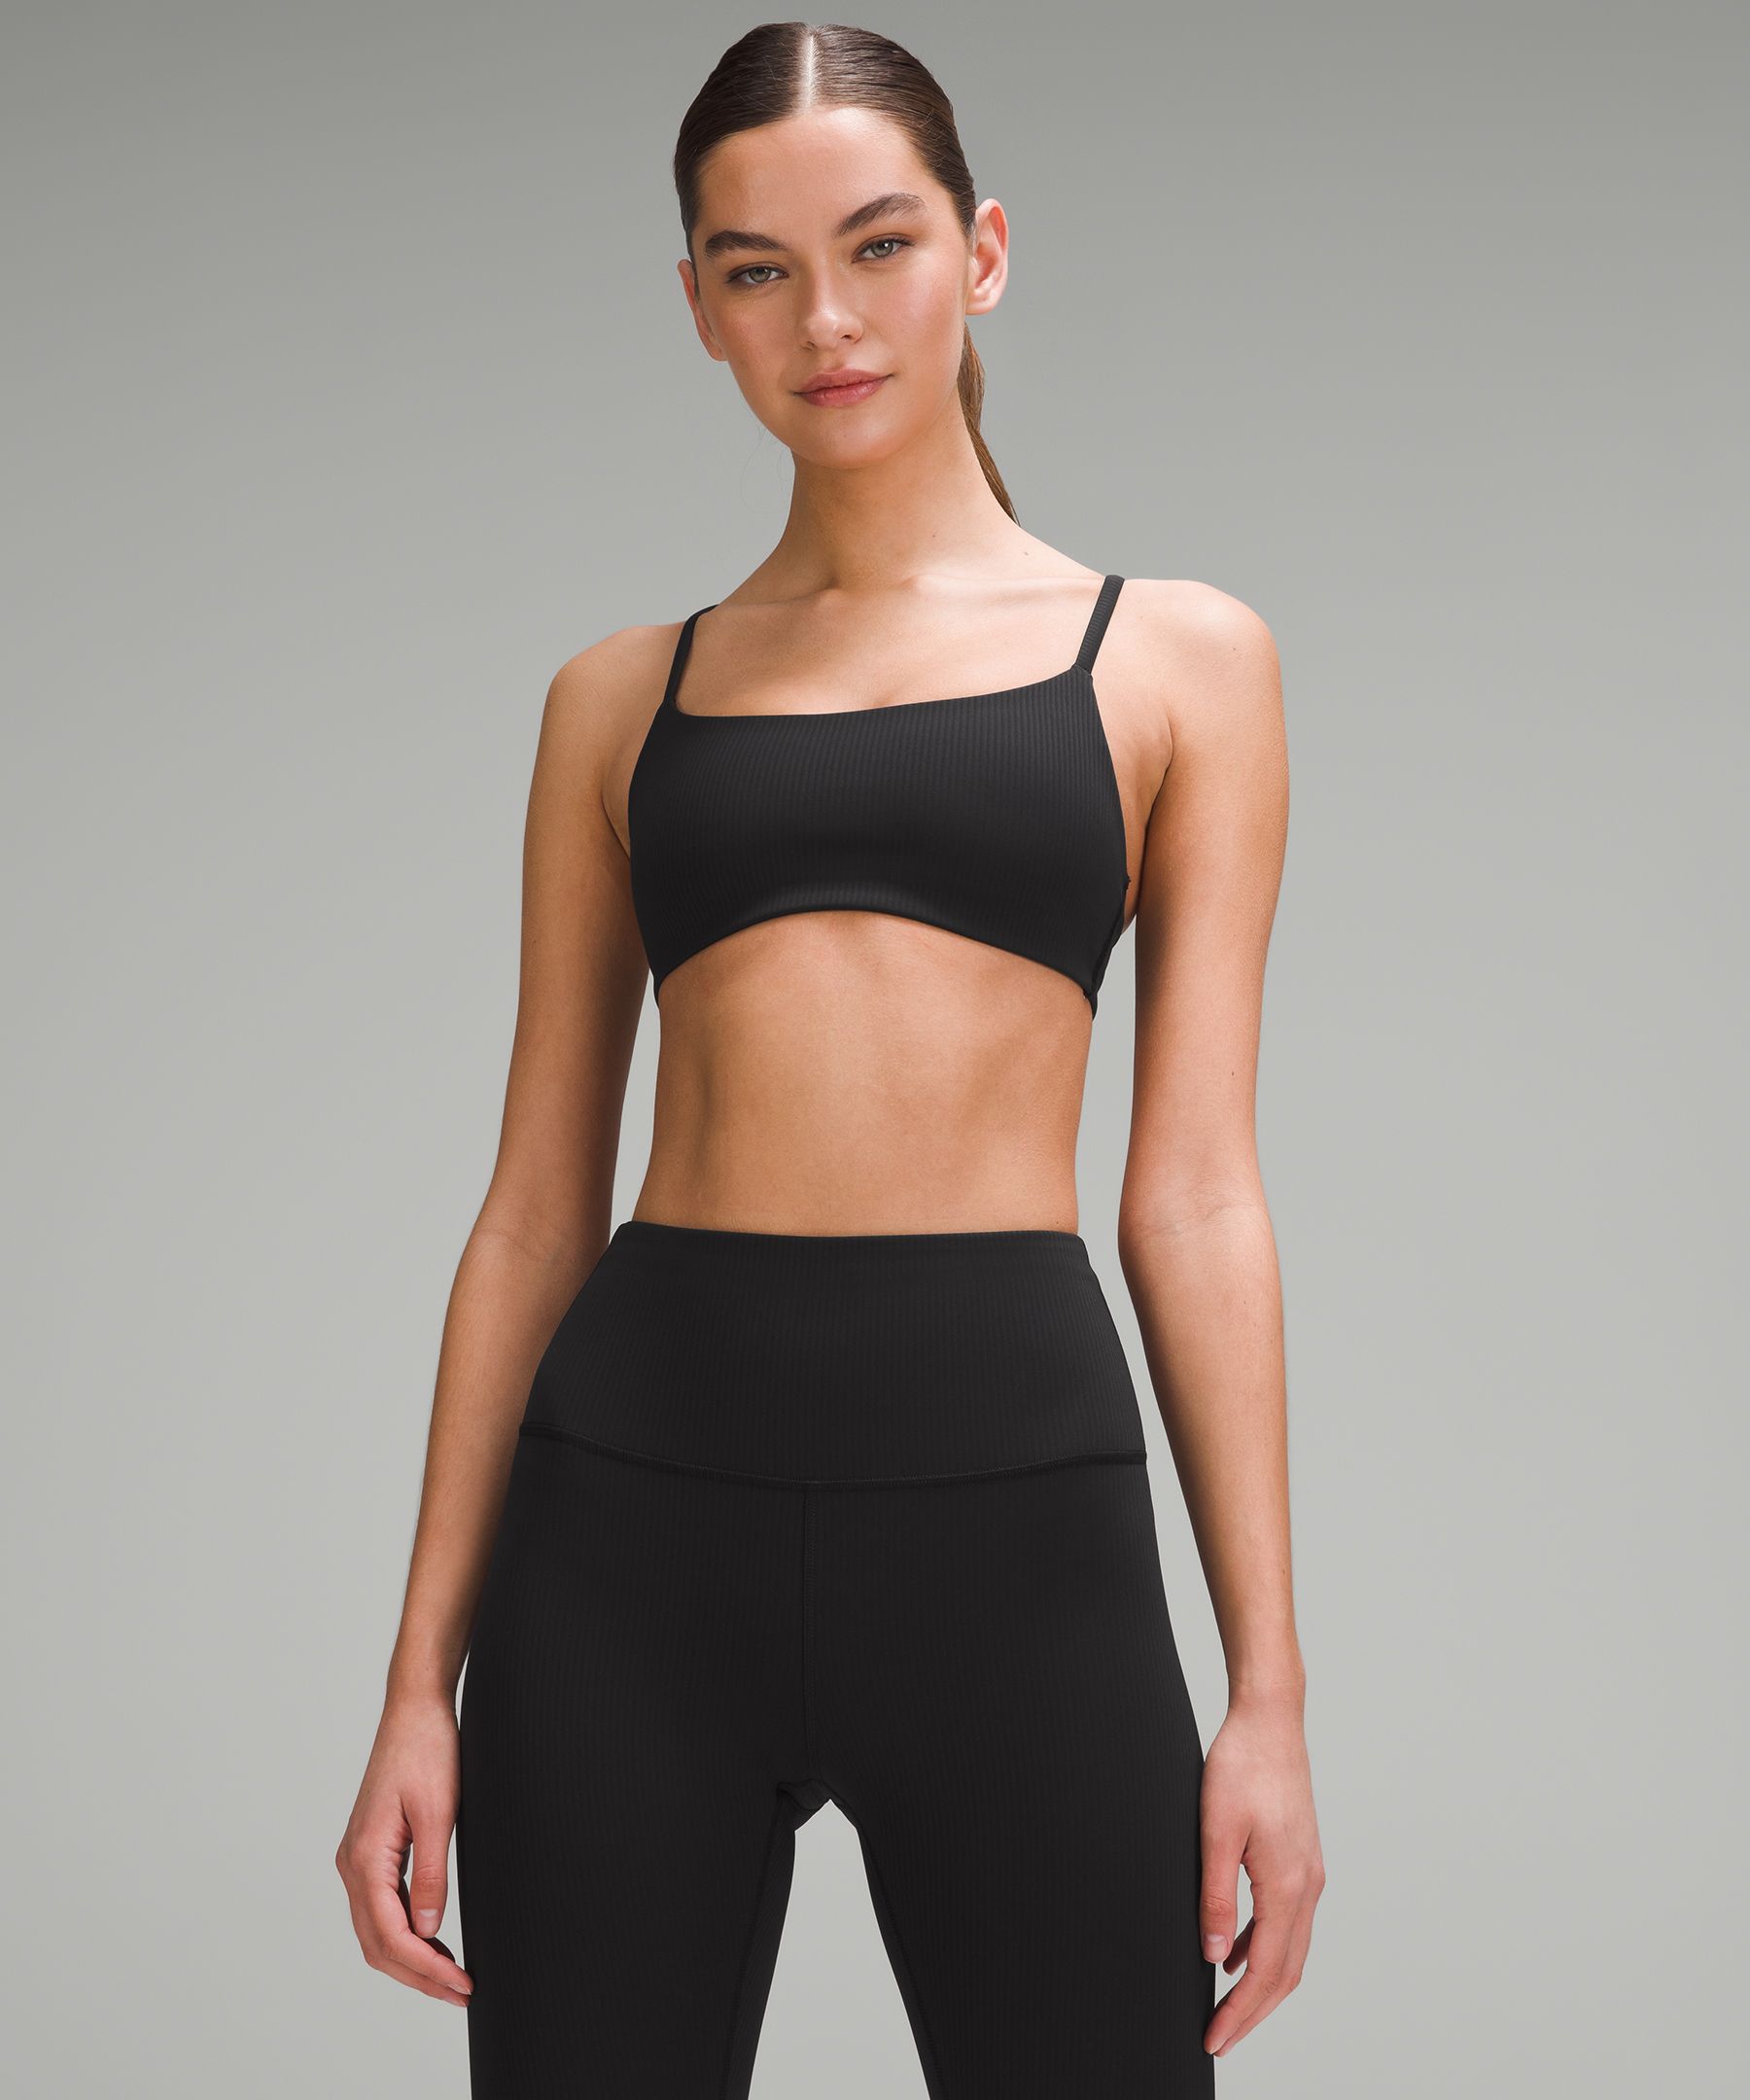 Lululemon Wunder Train Strappy Racer Bra Ribbed Light Support, A/b Cup